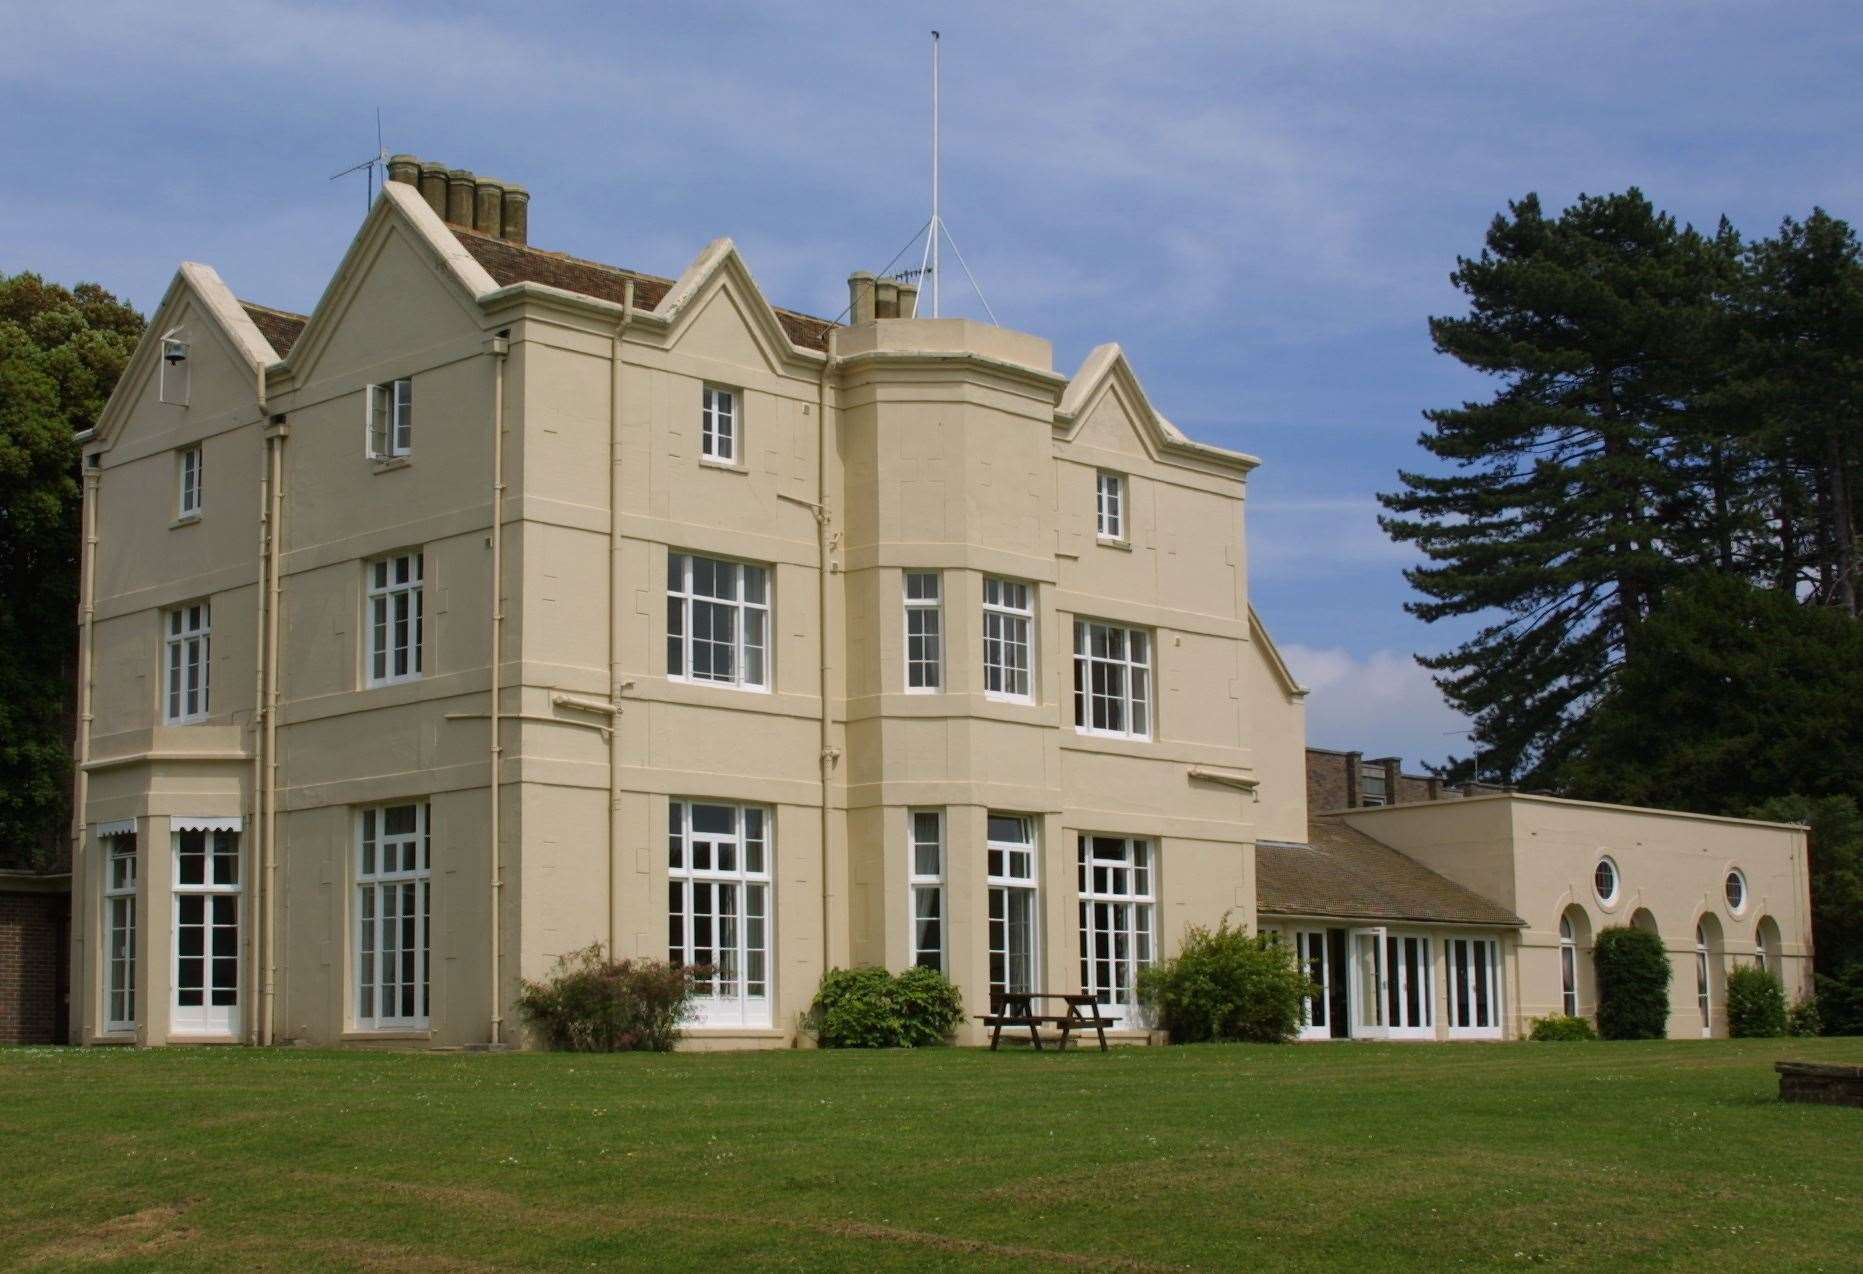 The site's main building, the Grade I listed Withersdane Hall